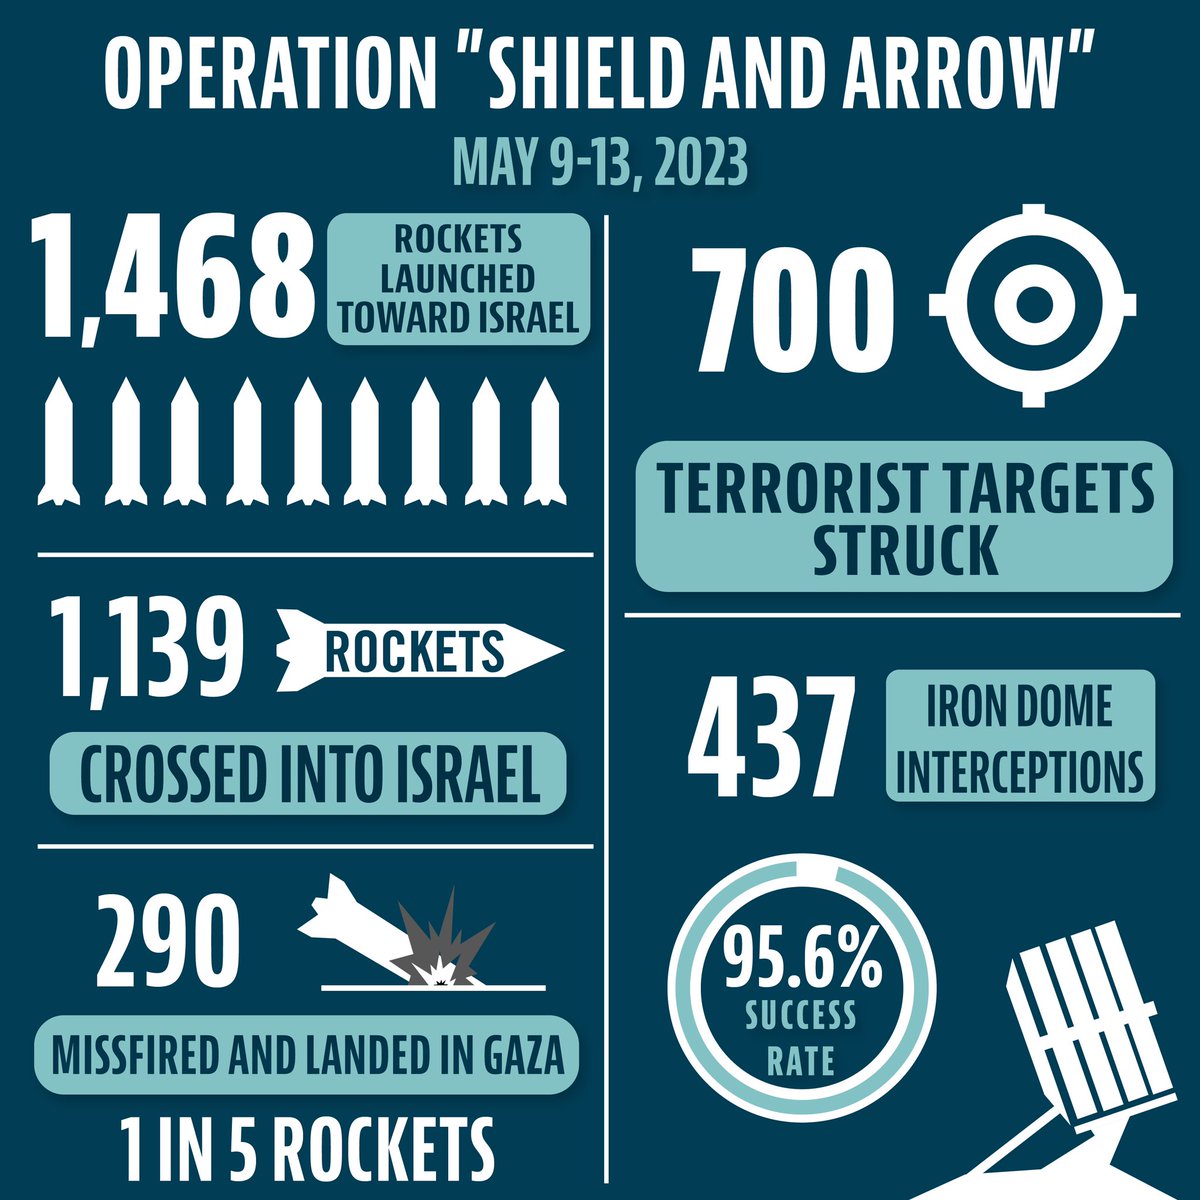 As of last night, a ceasefire between the IDF and Islamic Jihad was put into place—ending Operation “Shield and Arrow”. 

We will continue operating to maintain the stability and safety of Israelis.